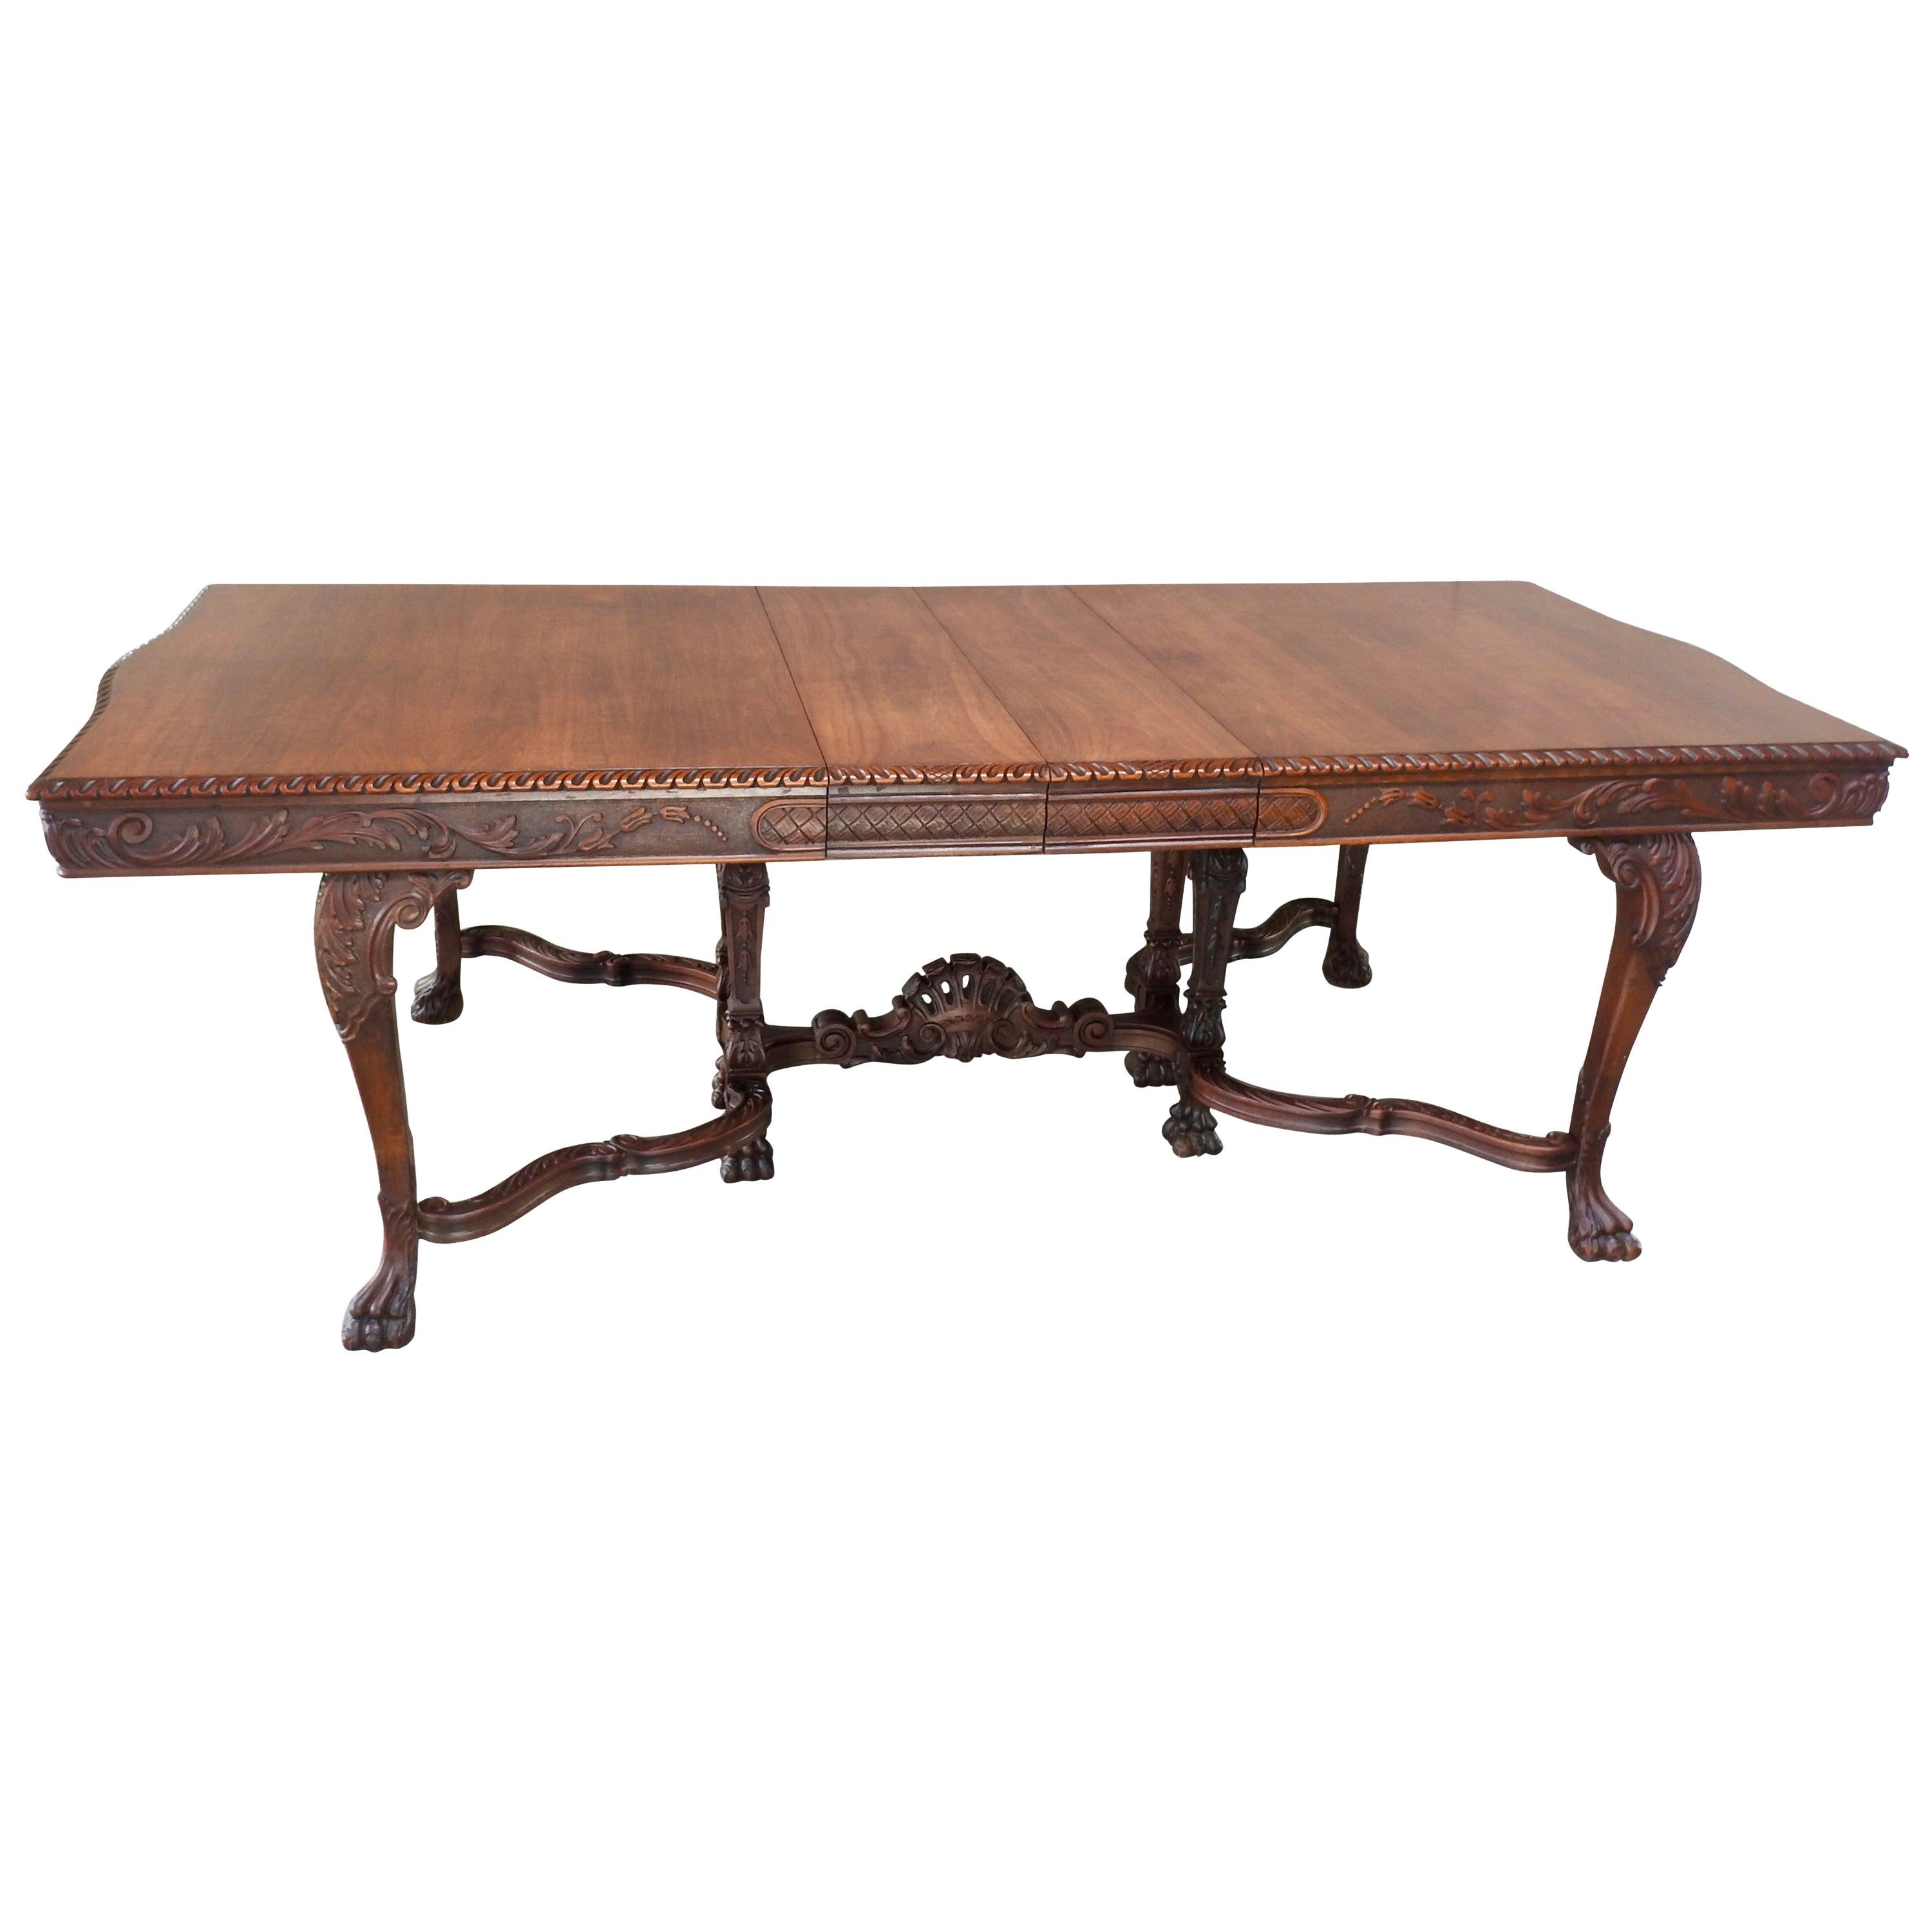 The details on this Victorian walnut dining table are exquisite! The draped carved legs have an ornate fan gracing the center. These are framed by the hairy paw feet. Scrolls and basketweave surround the edges of the table with curves on the ends.